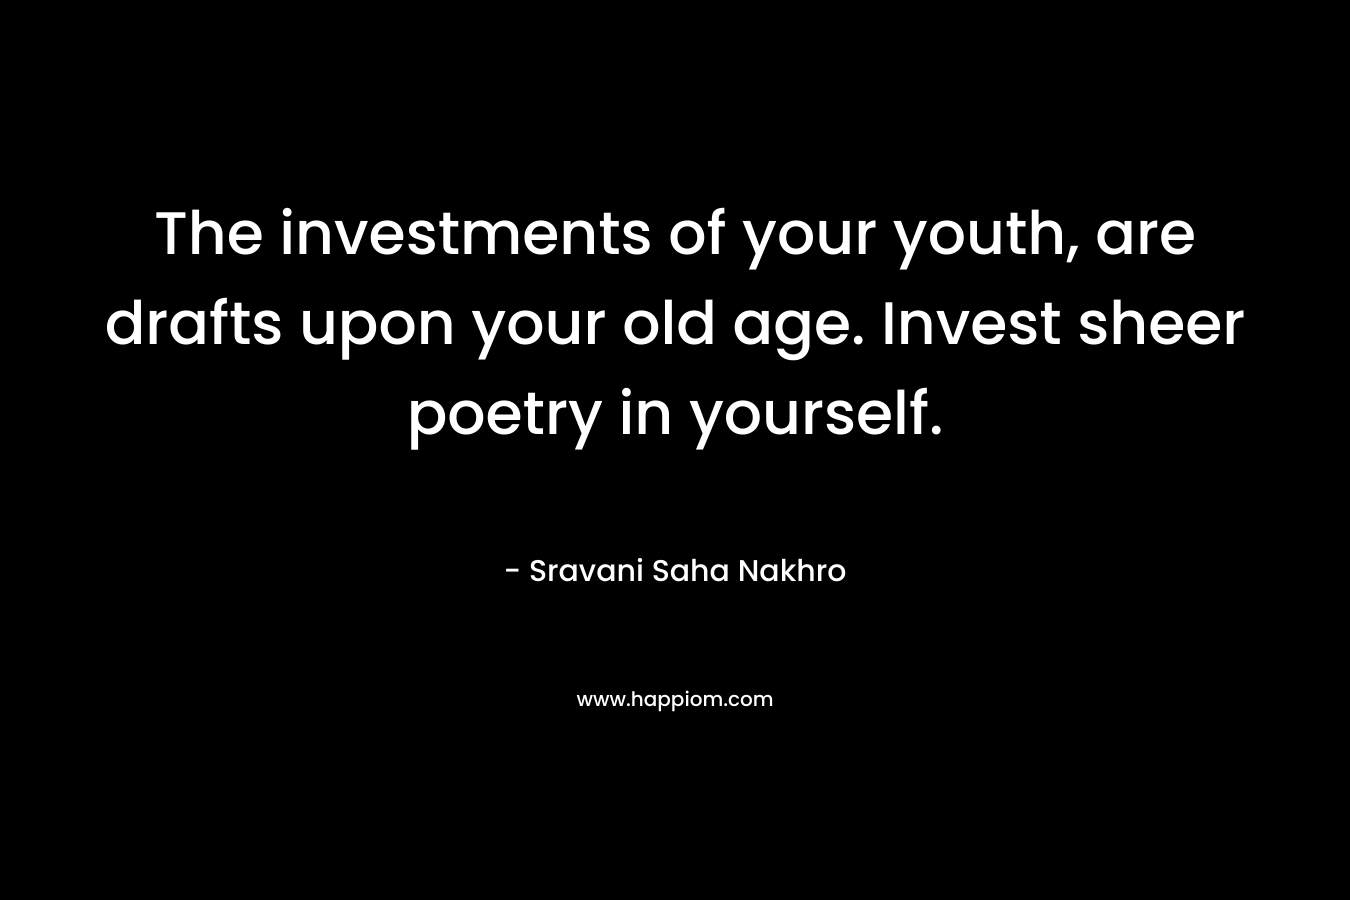 The investments of your youth, are drafts upon your old age. Invest sheer poetry in yourself. – Sravani Saha Nakhro